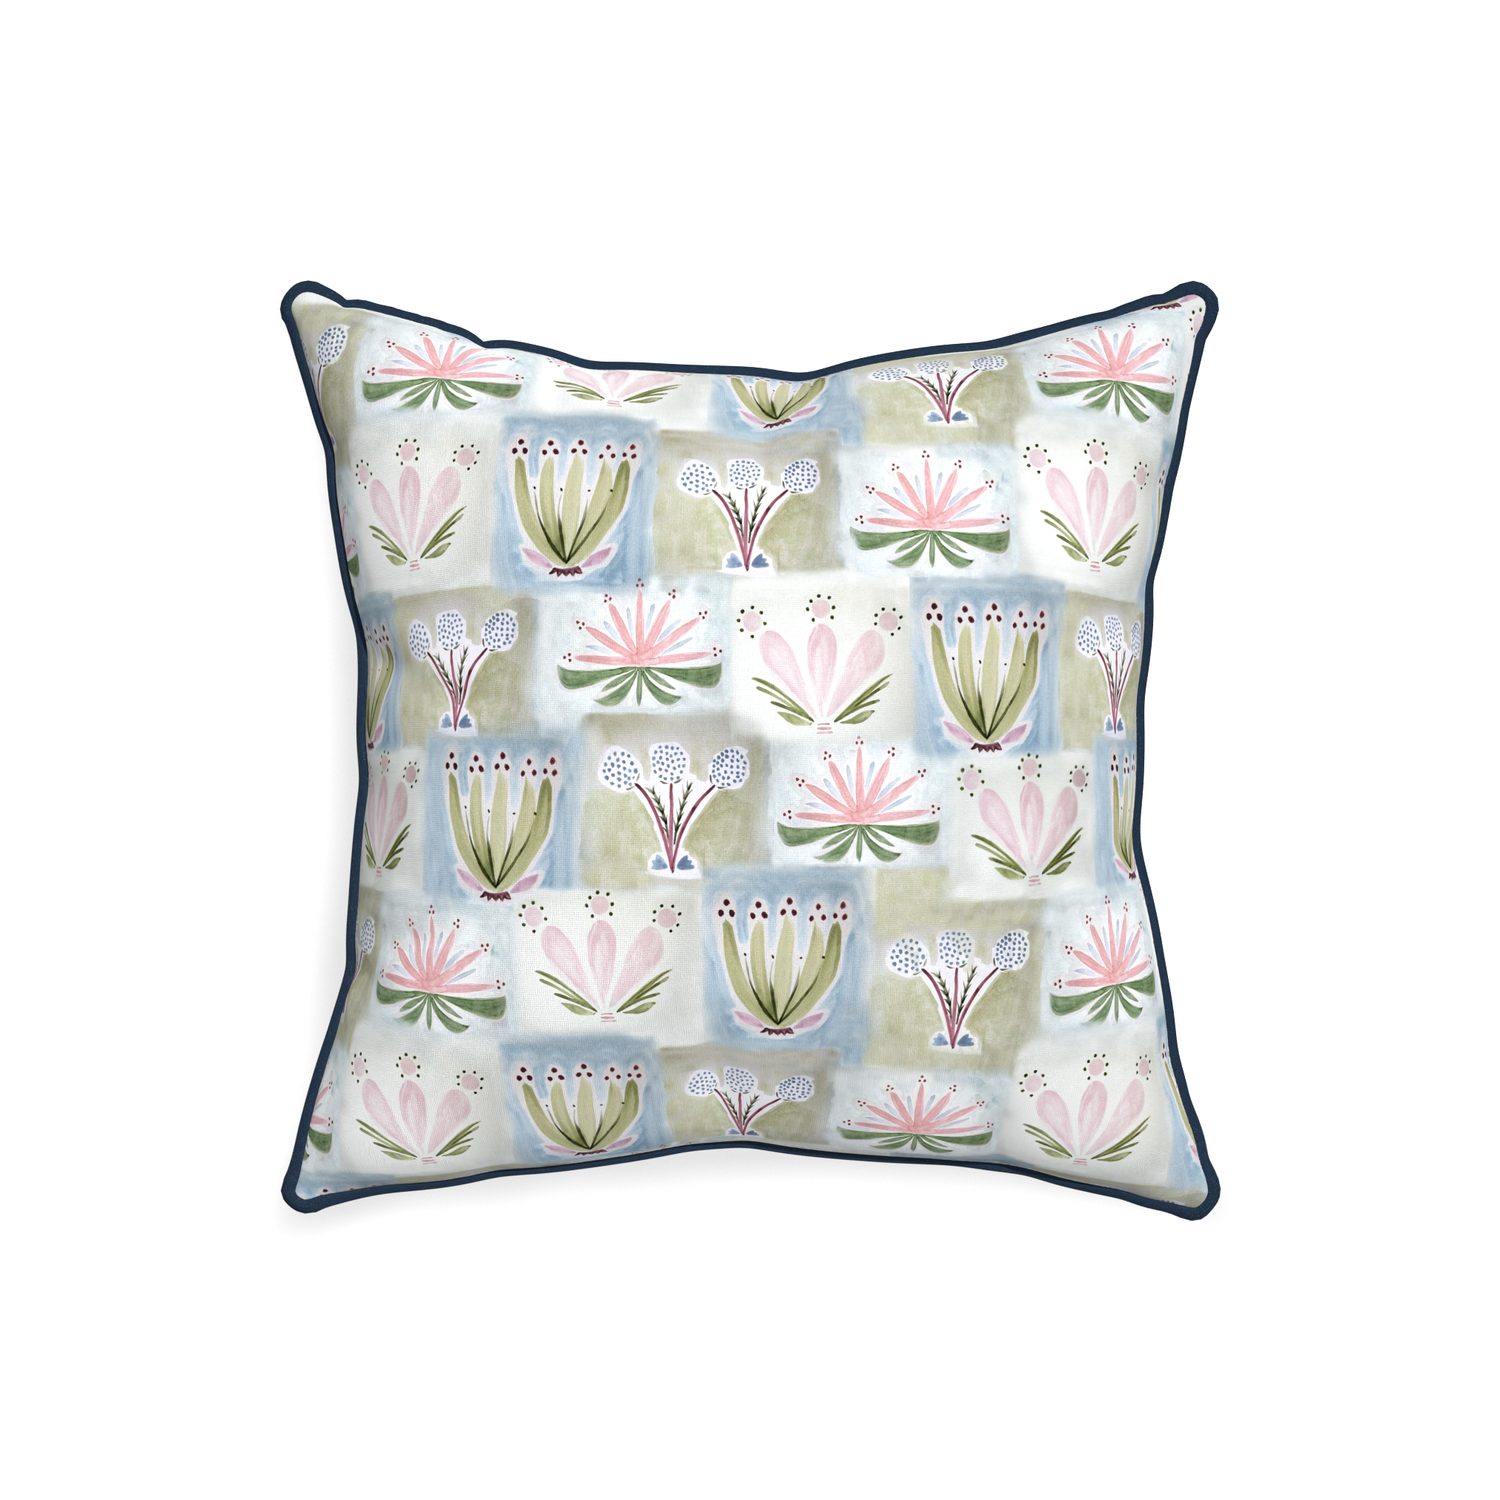 20-square harper custom hand-painted floralpillow with c piping on white background